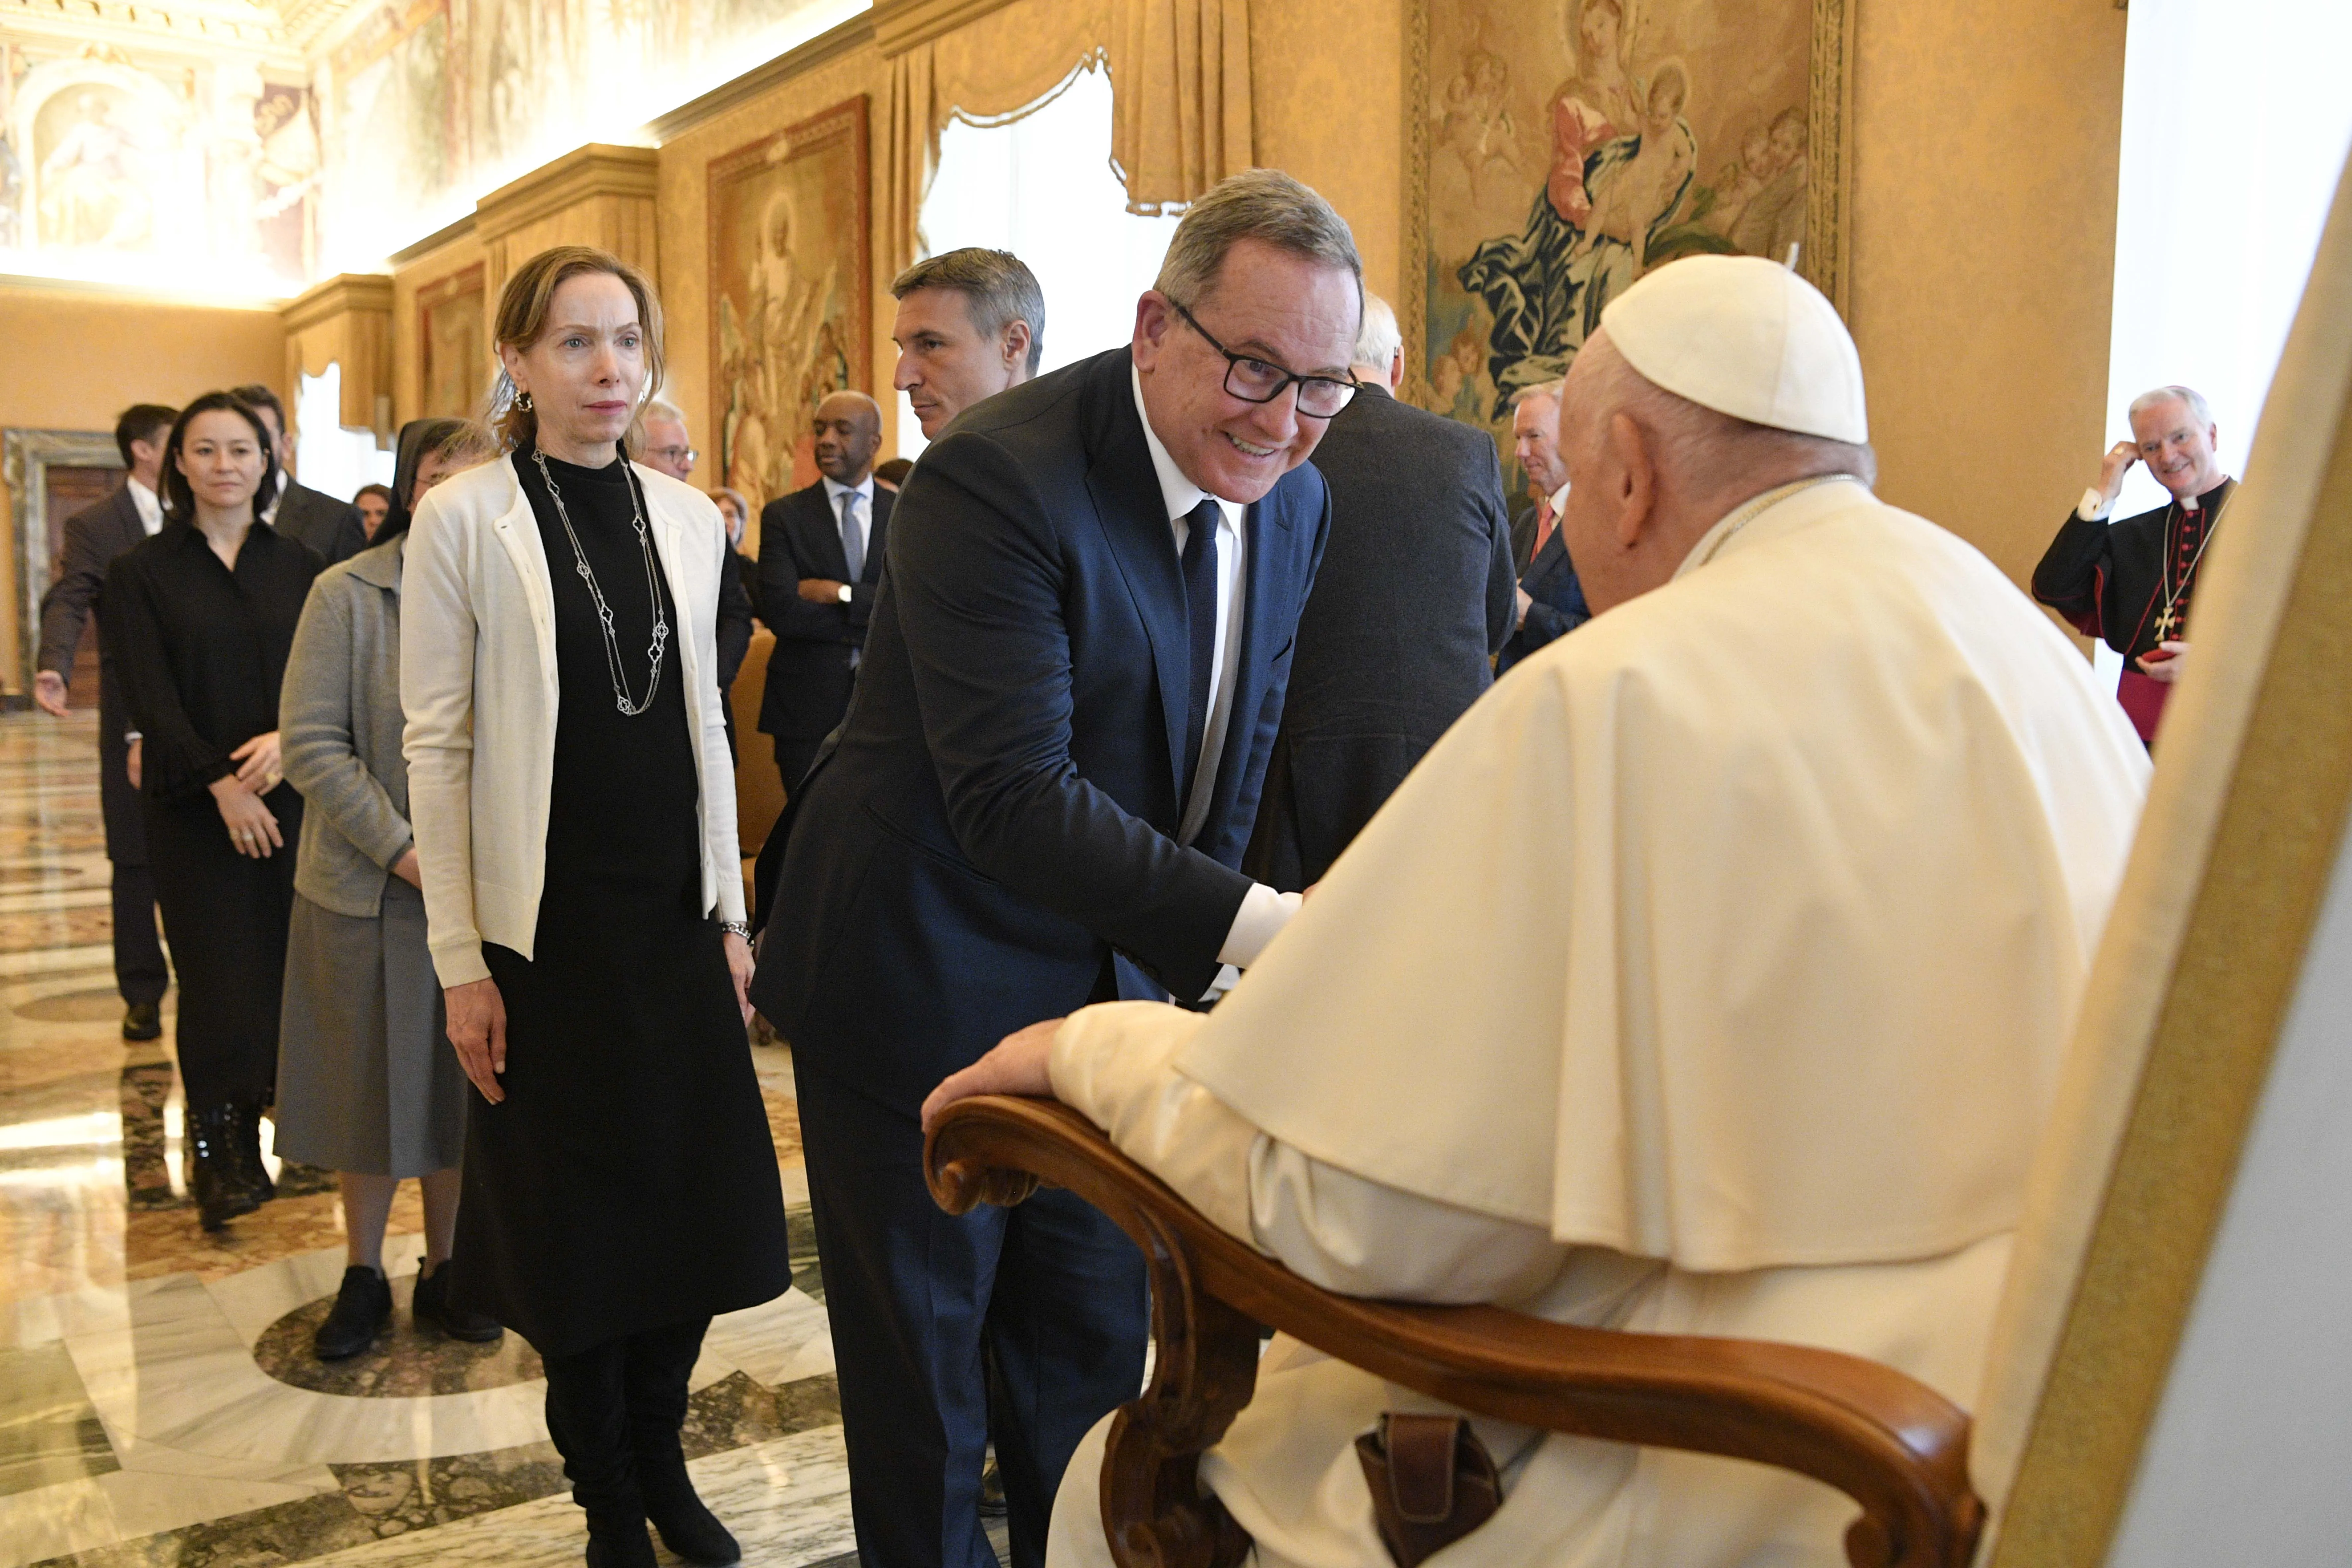 Pope Francis meets with participants of the Minerva Dialogues — a meeting of scientists, engineers, business leaders, lawyers, philosophers, Catholic theologians, ethicists, and members of the Roman Curia to discuss digital technologies — at the Vatican on March 27, 2023.?w=200&h=150